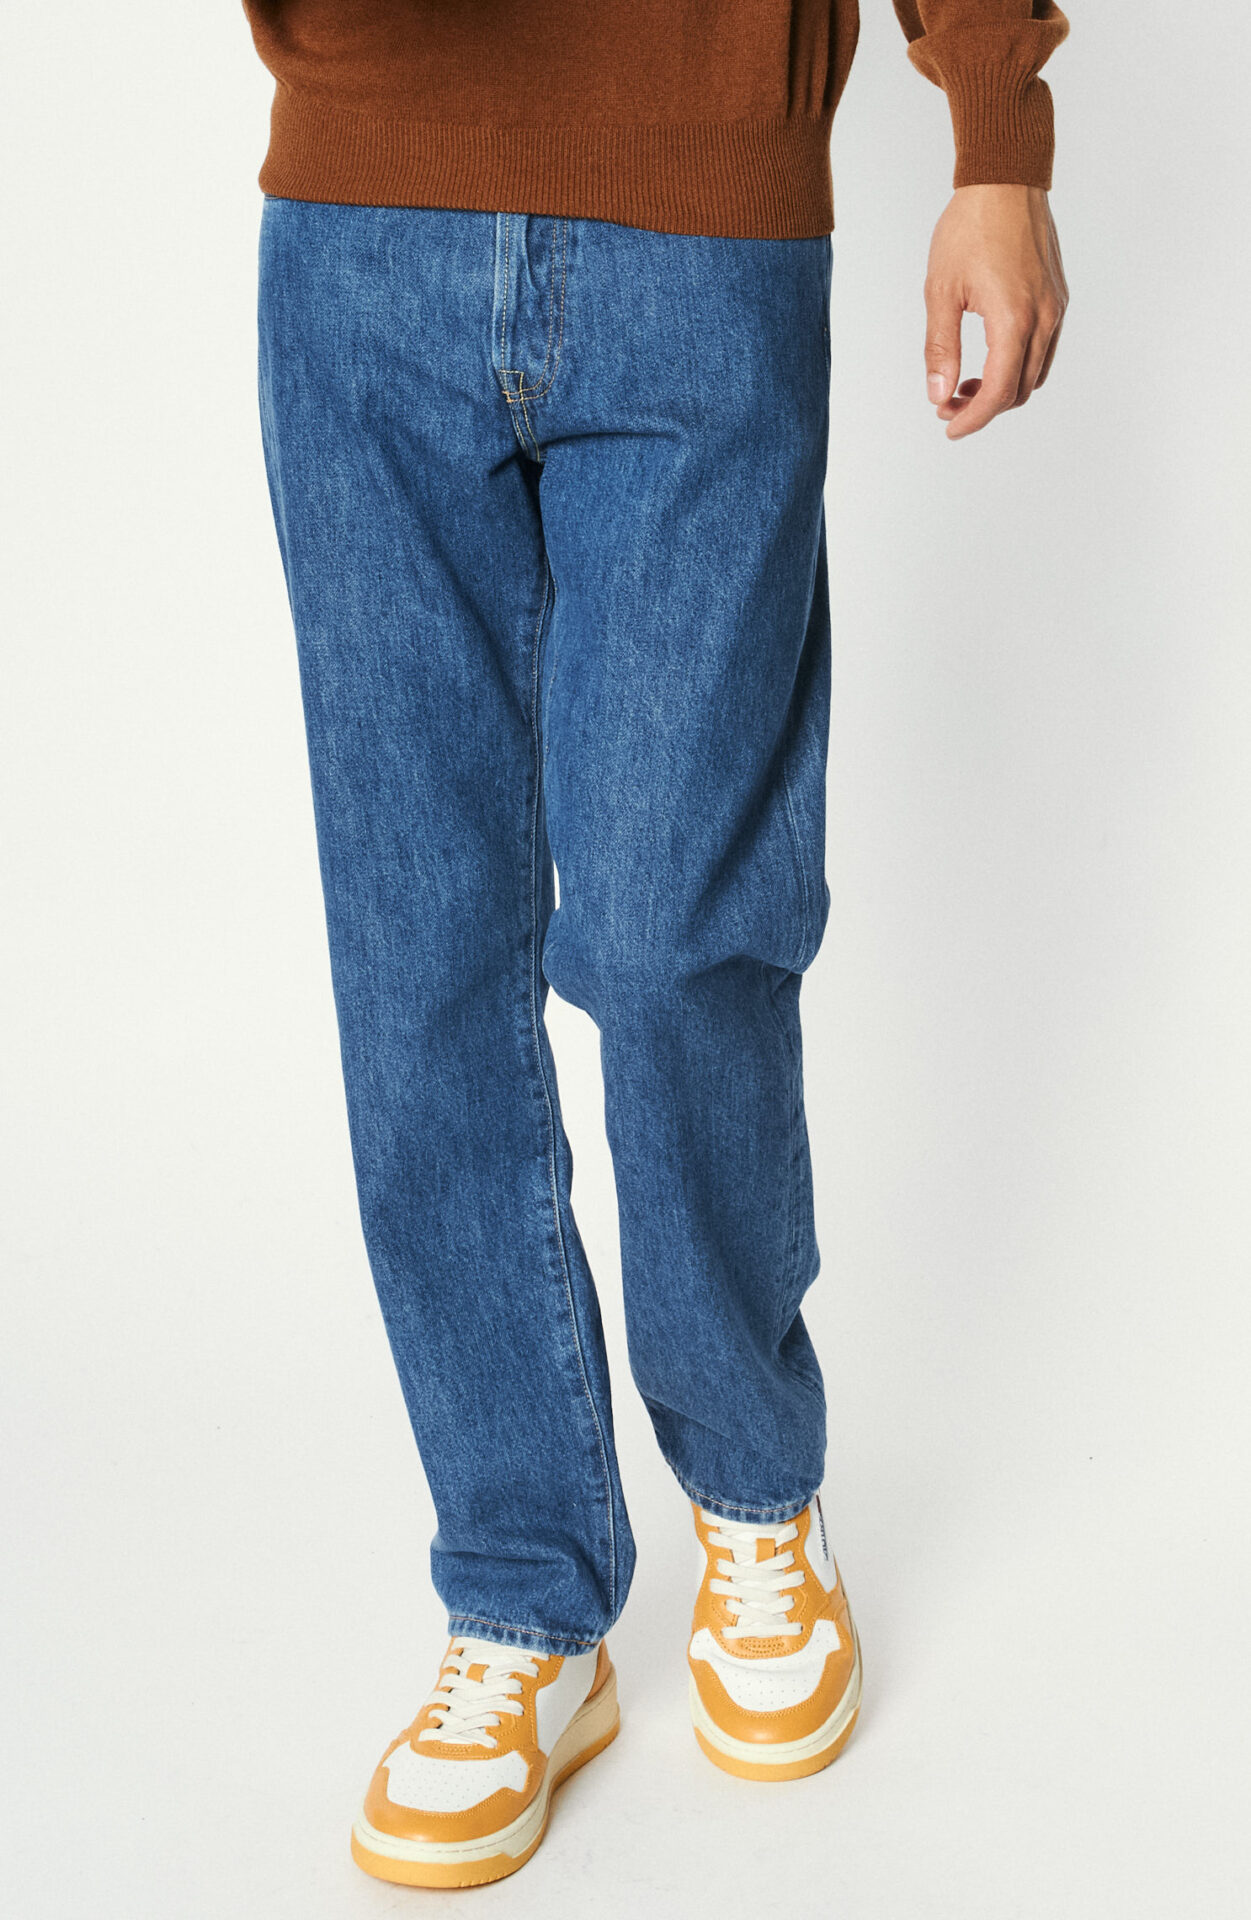 krave Tage med systematisk Acne Studios - Classic jeans "1996" in medium blue - Schwittenberg